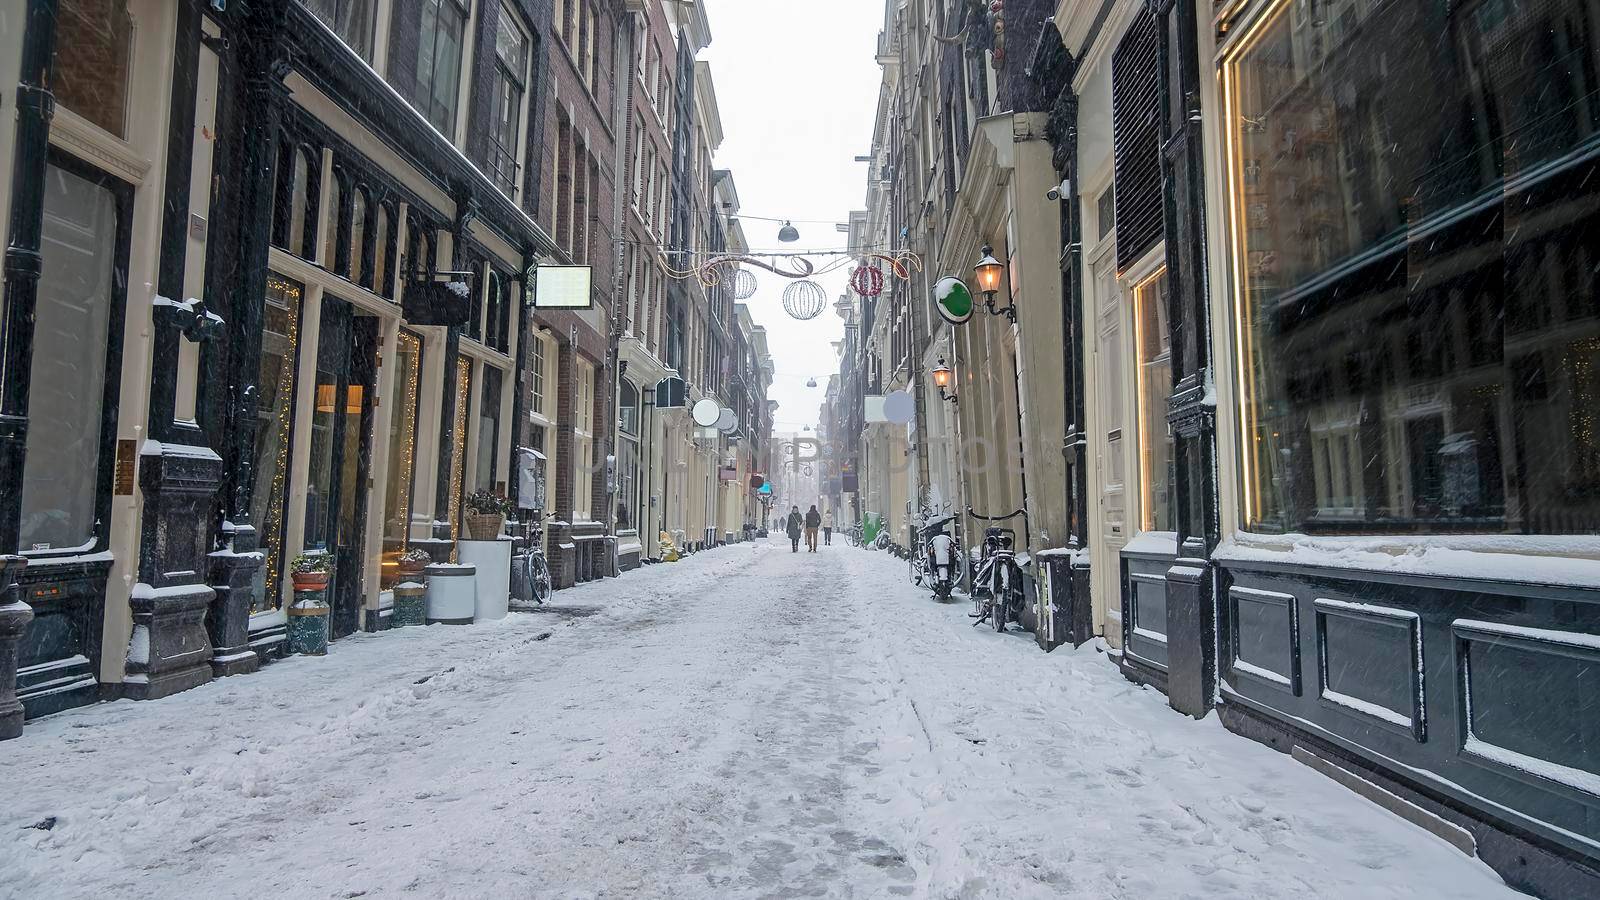 Snowy red light district in Amsterdam the Netherlands by devy